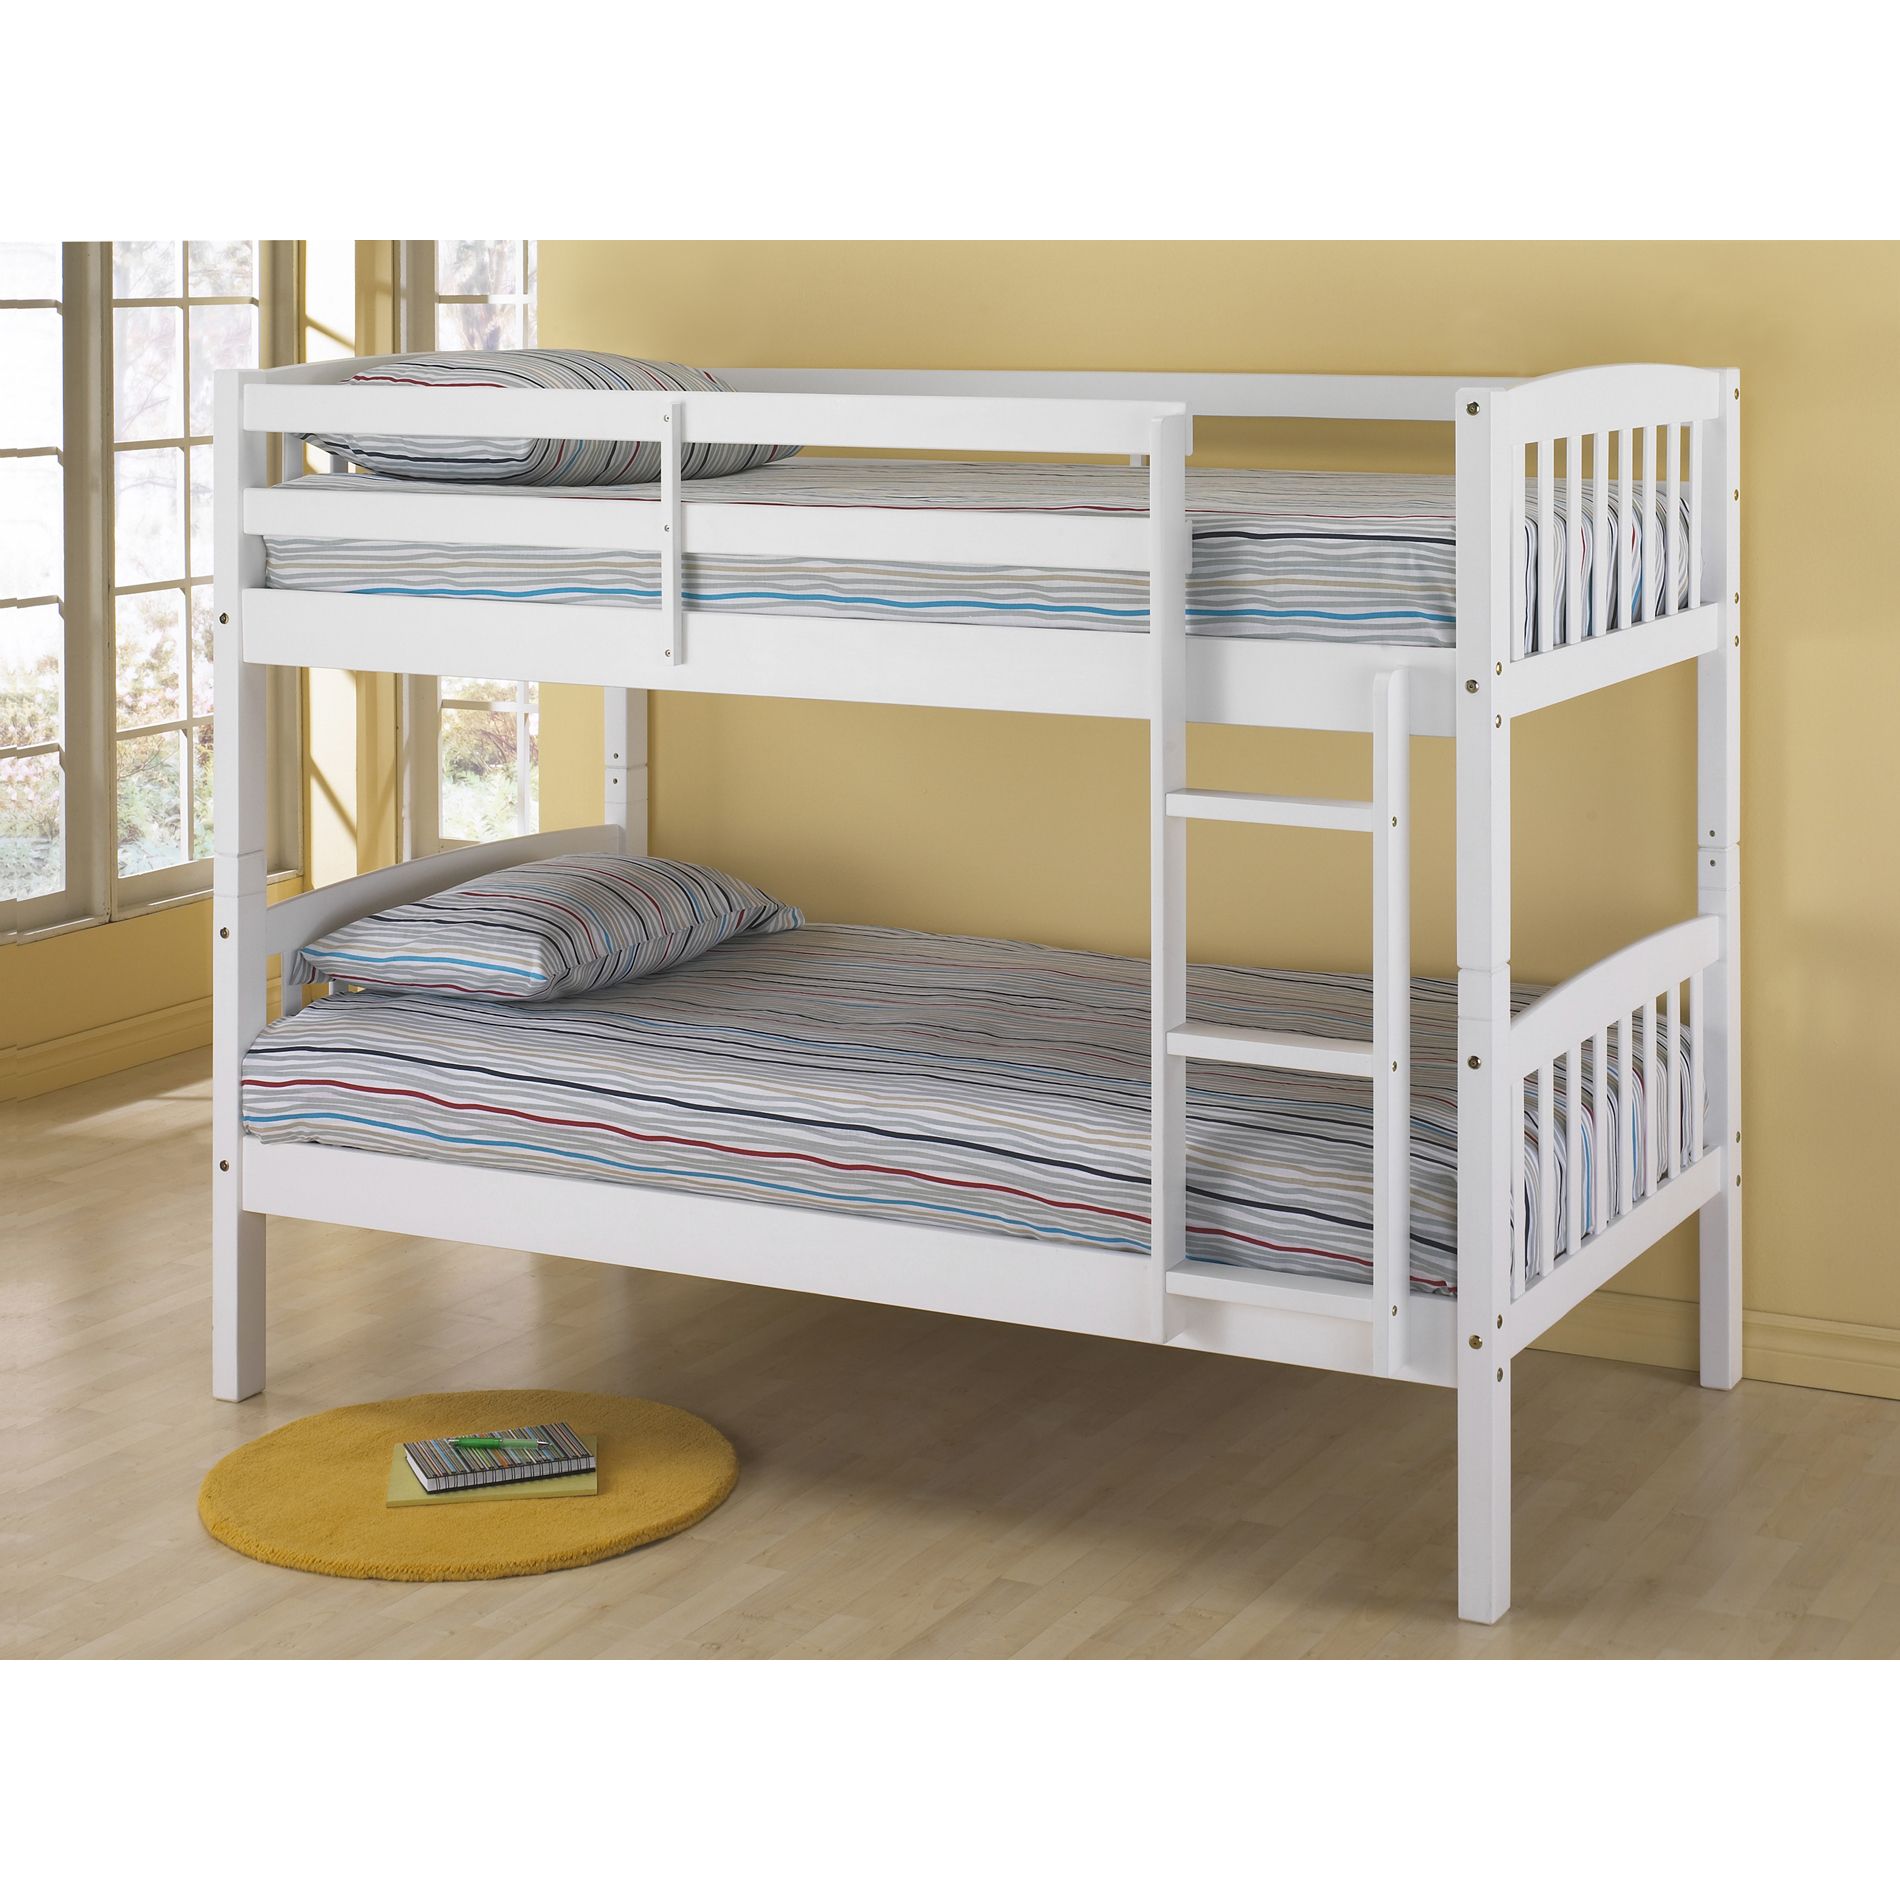 where can i buy bunk beds